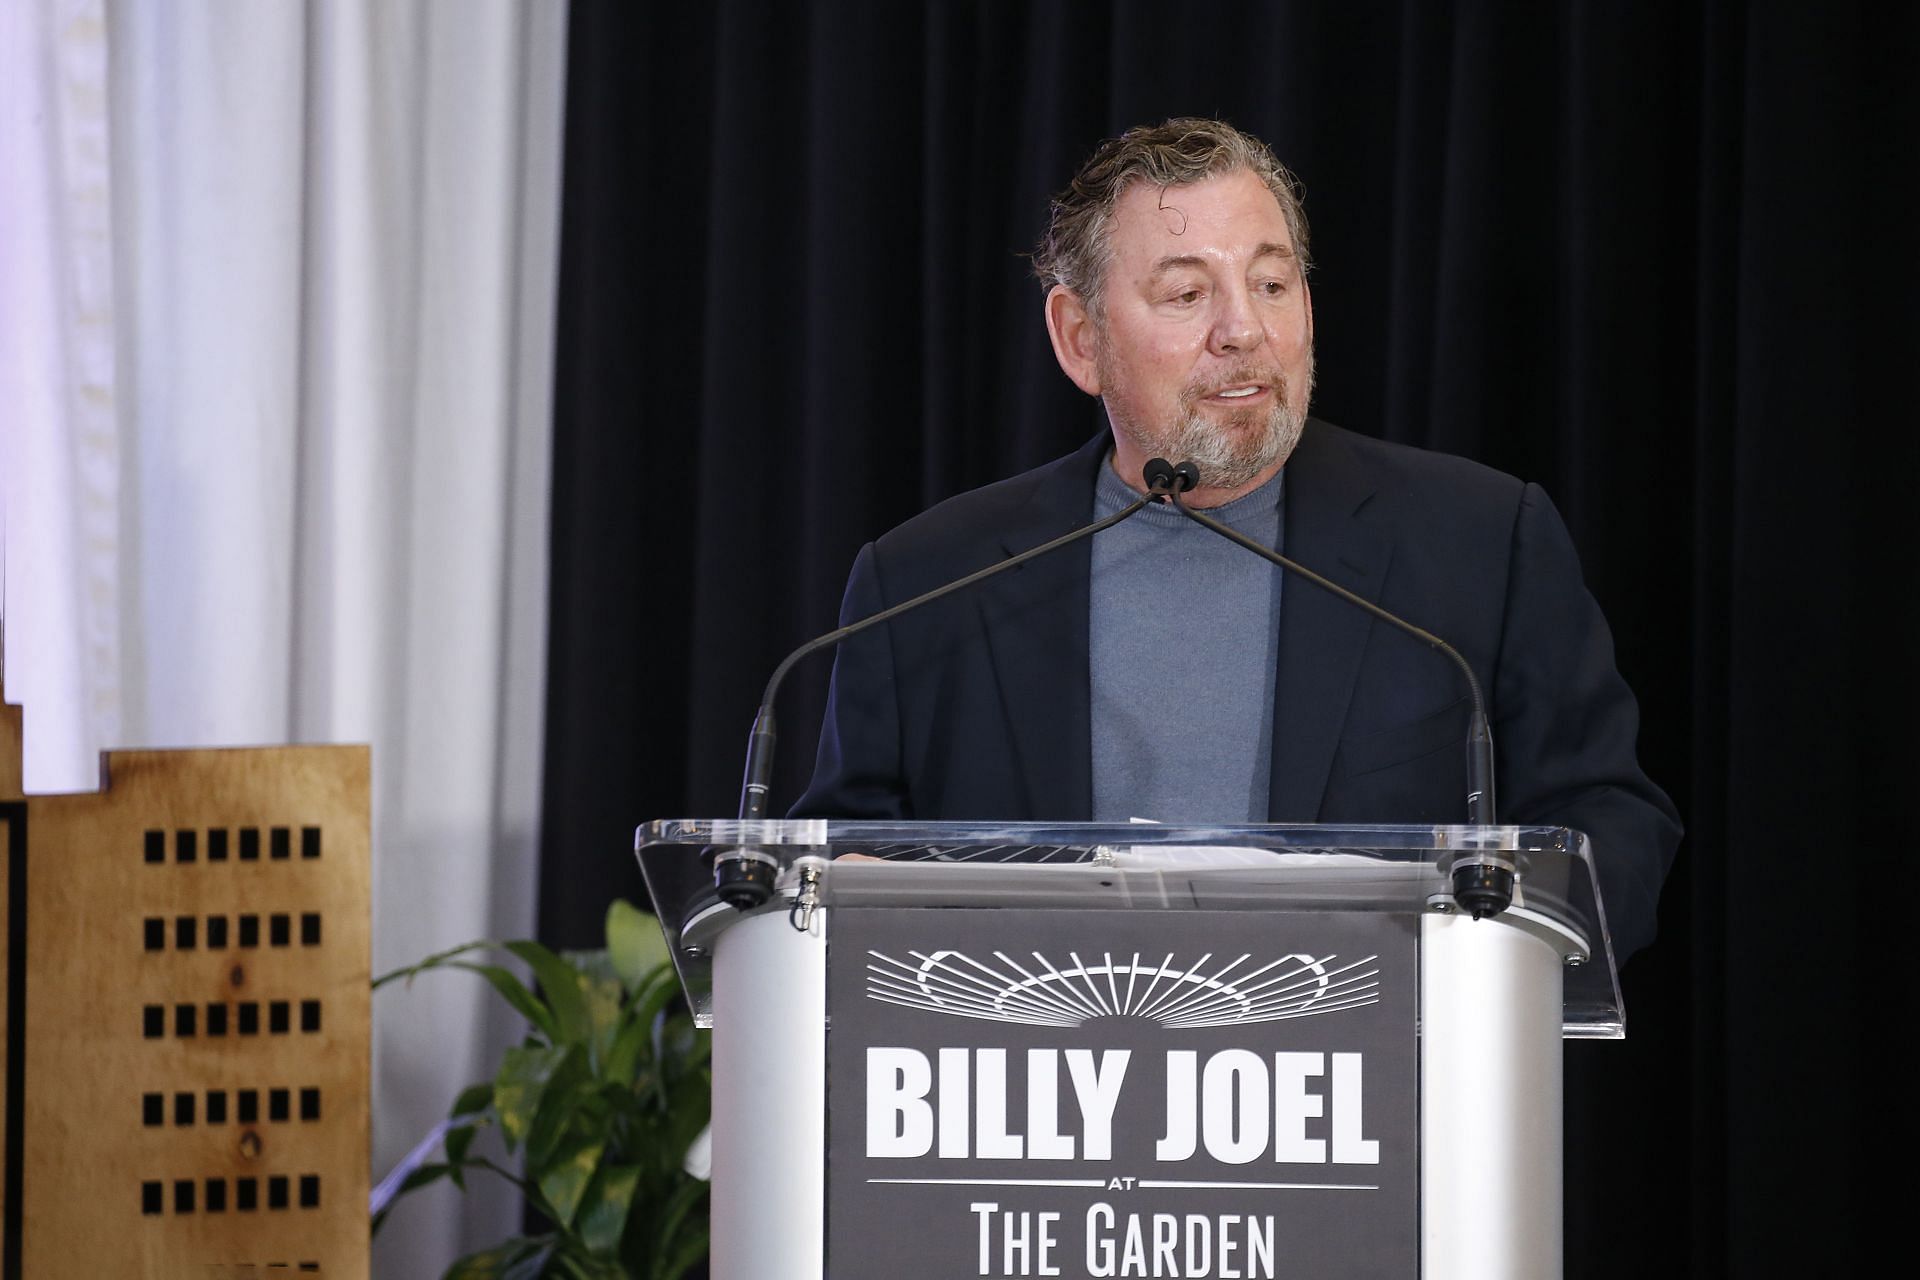 MSG Entertainment And Billy Joel Make A Special Franchise Announcement